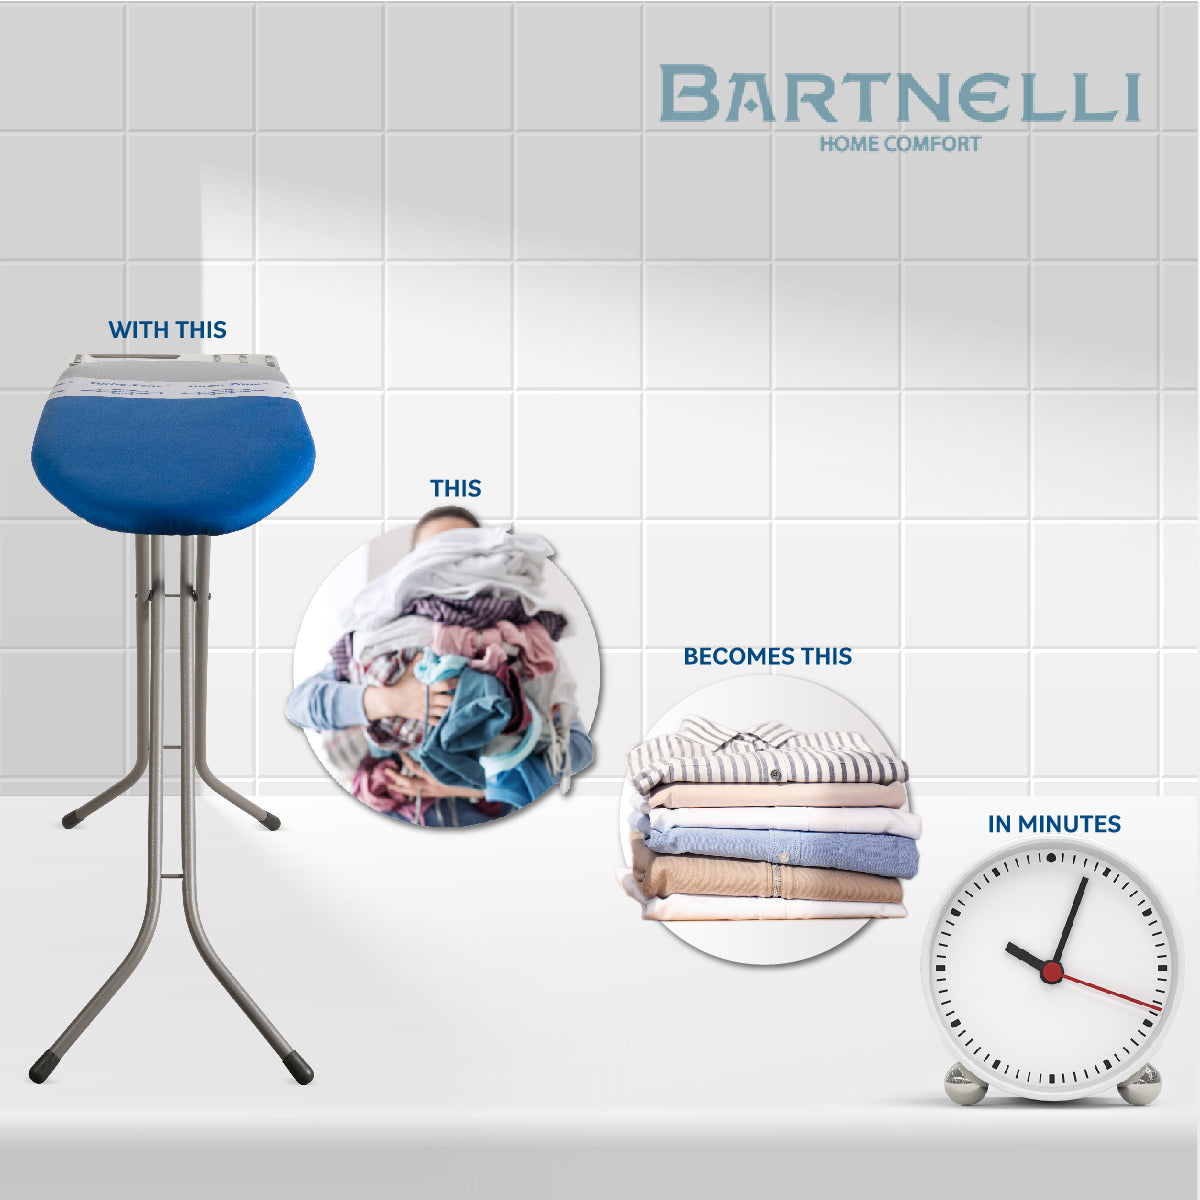 Bartnelli Heavy Duty Ironing Board 48x15 | Designed & Made in Europe with Patent Technology, Turbo & Park Zone, Features: 4 Layer Cover &Pad,Height-Adjustable,4 Premium Steel Legs,Upgraded Iron Rest (BLUE)